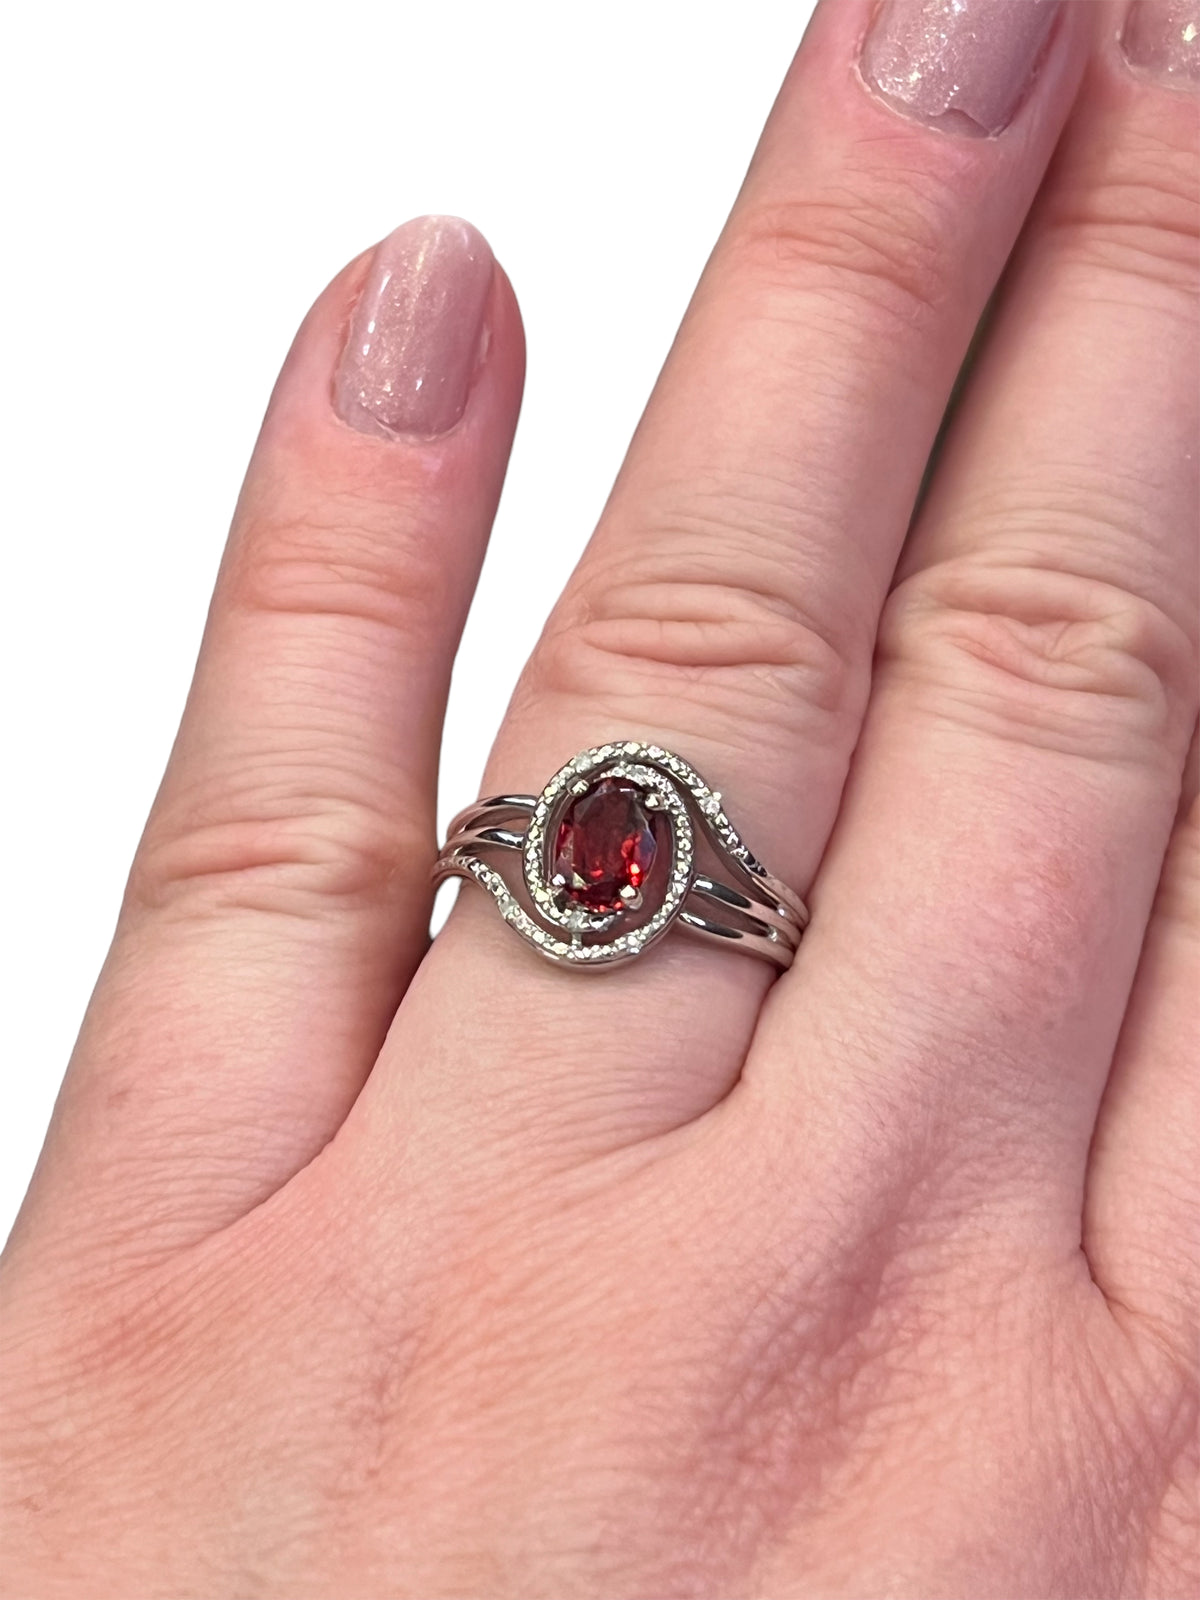 925 Sterling Silver 7 x 5mm Garnet and 0.03cttw Diamond Ring - Size 6